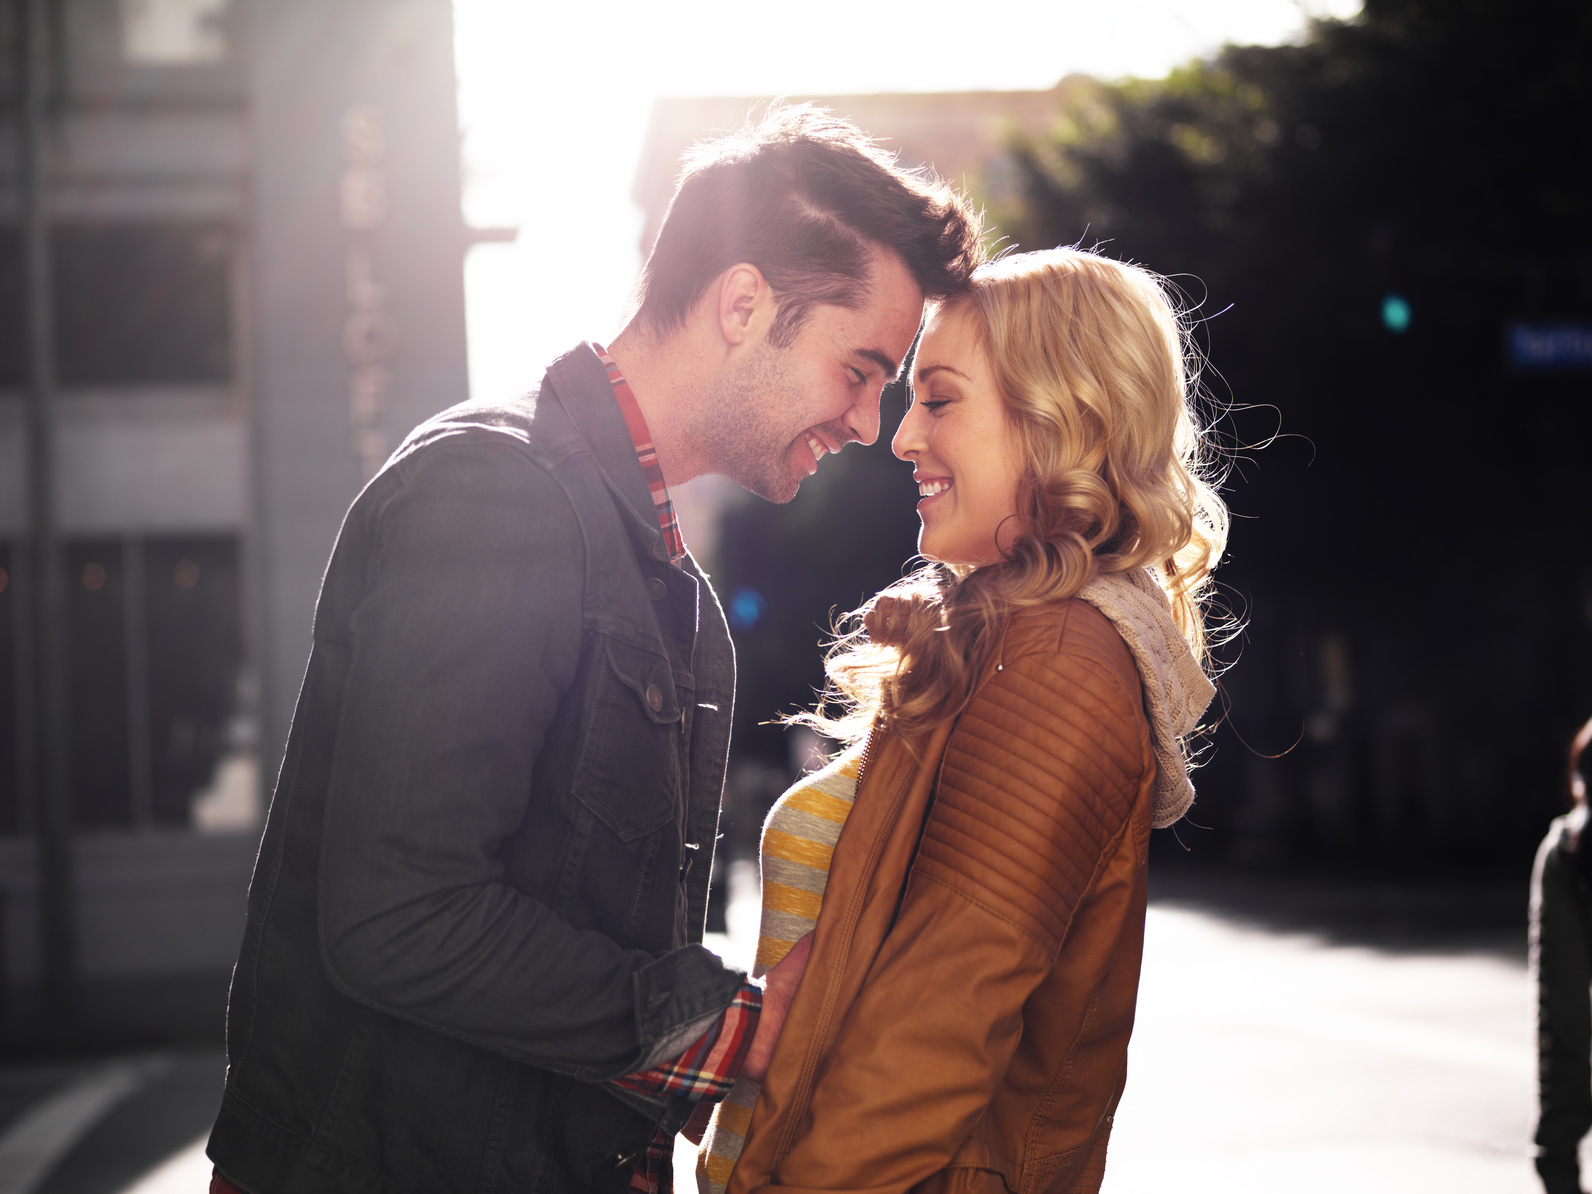 couple on street in city flirting with lens flare